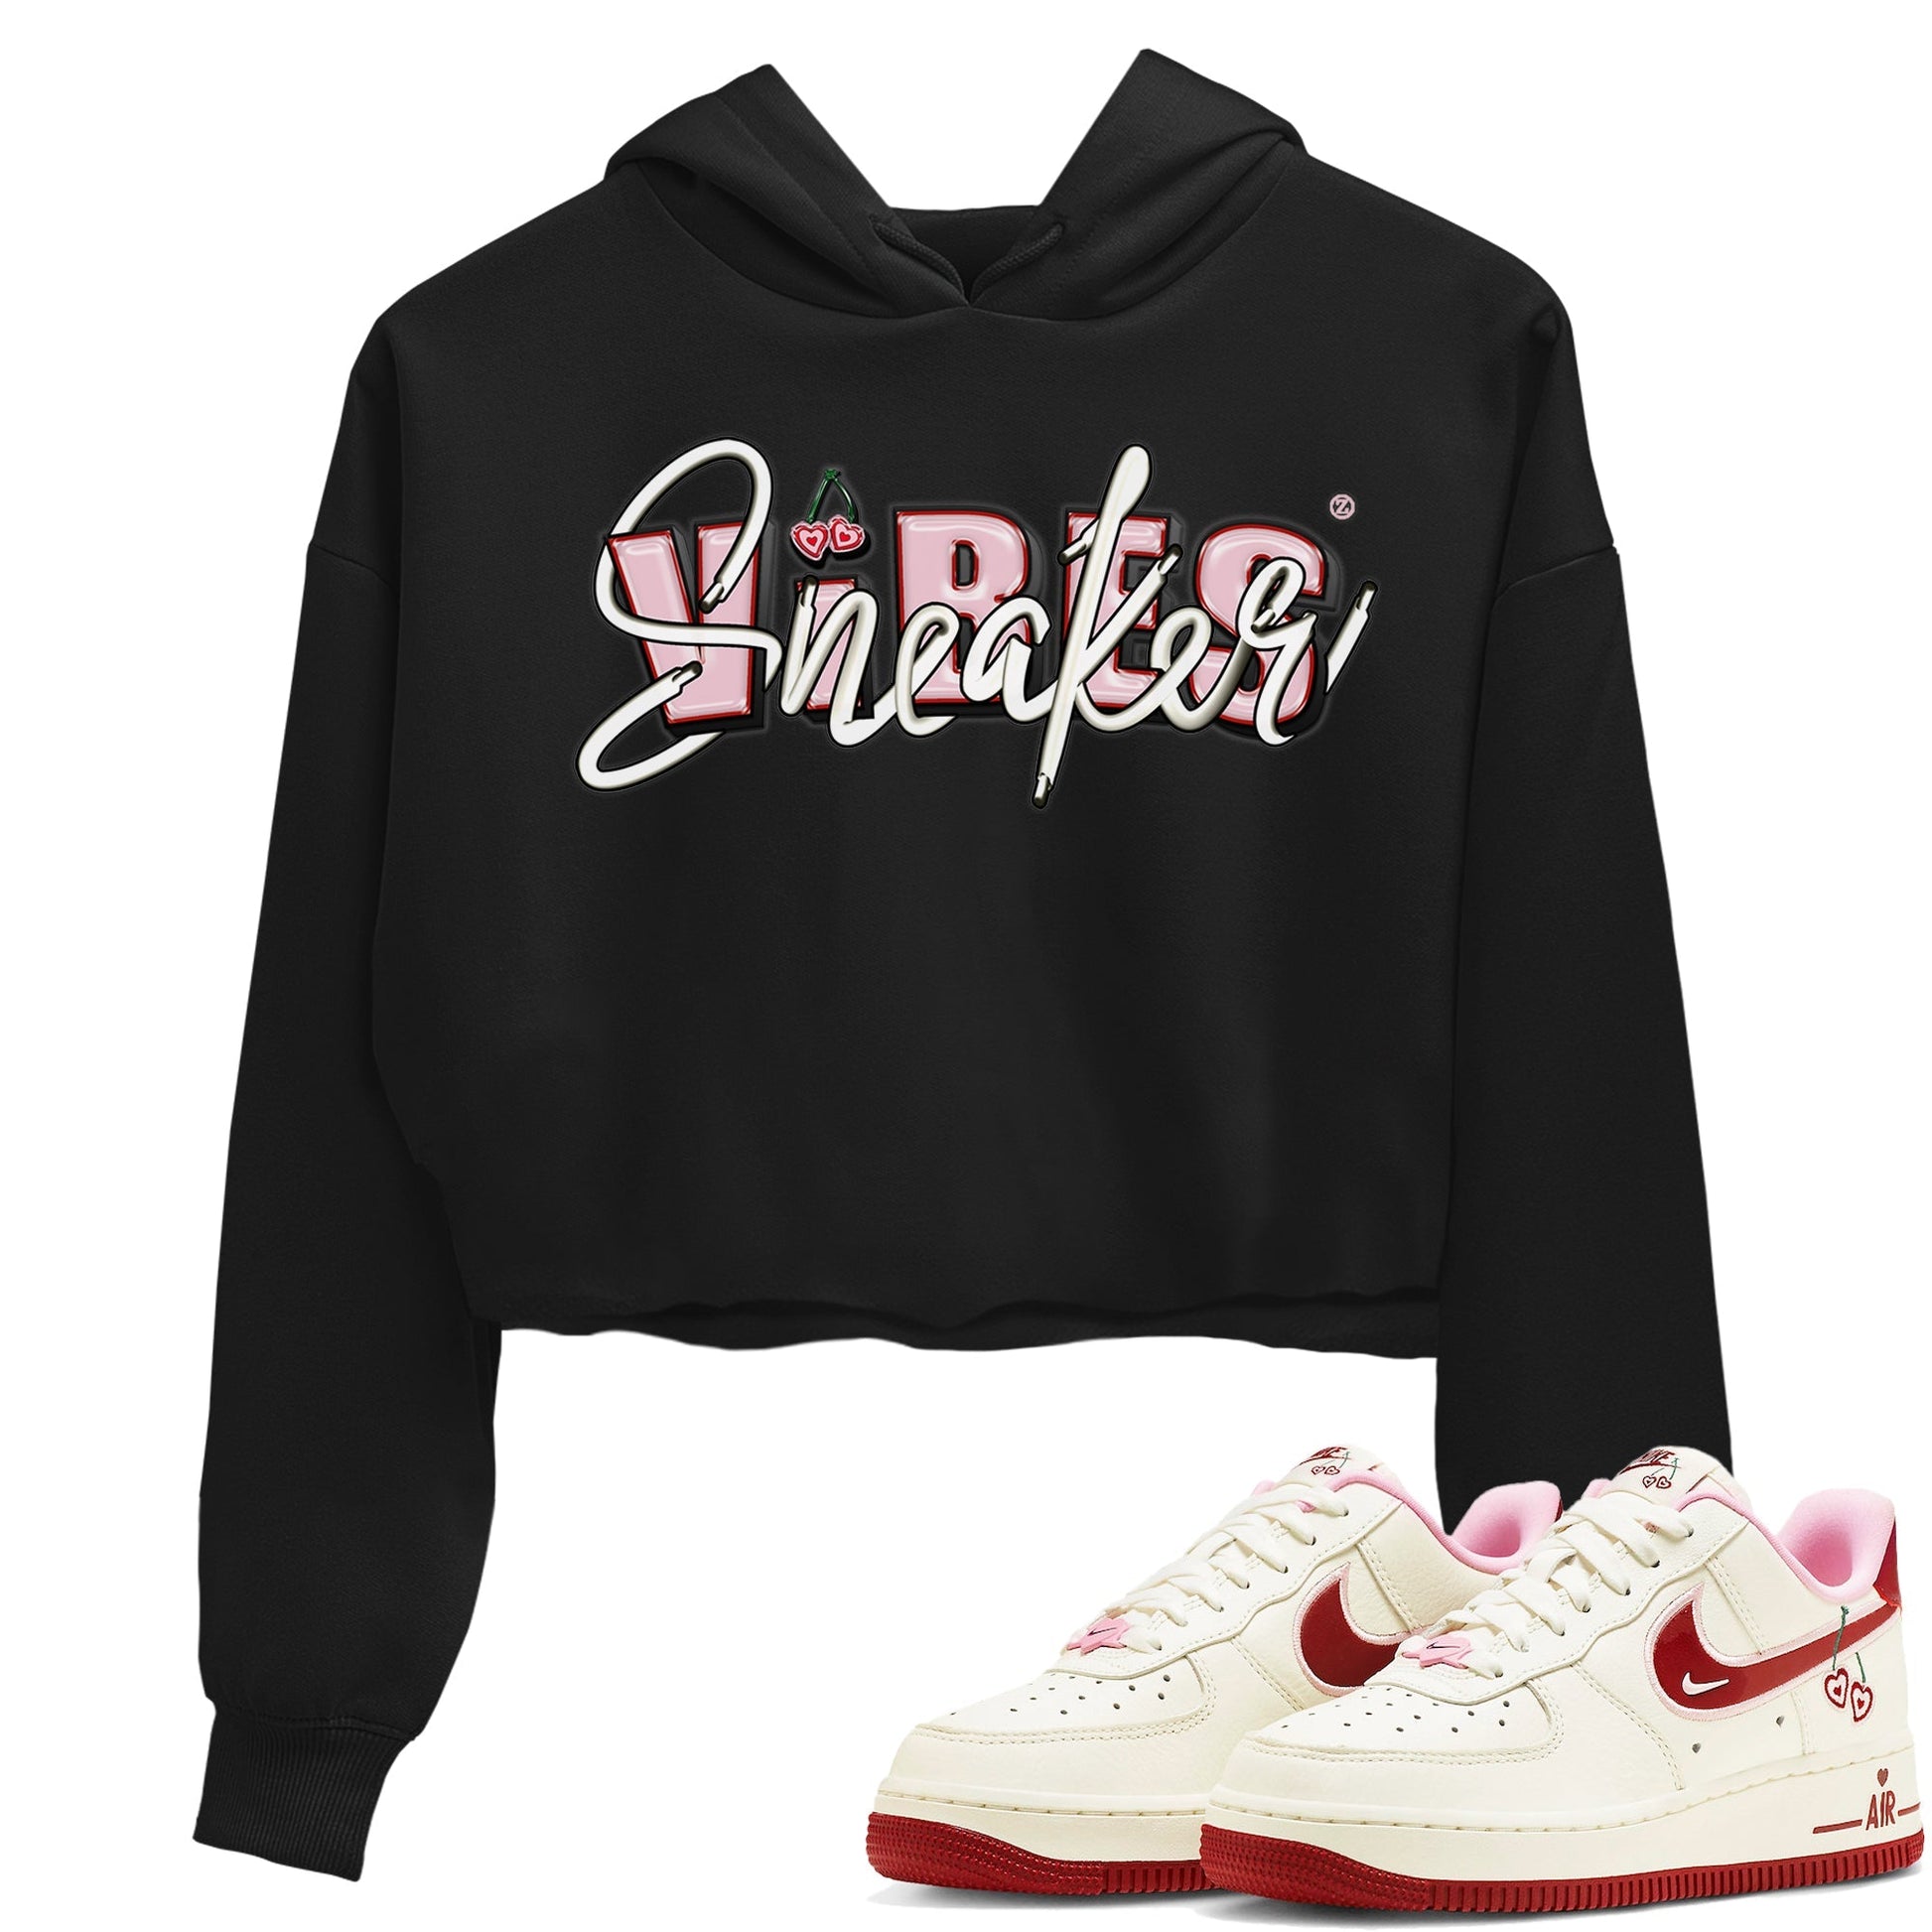 Air Force 1 Valentines Day Sneaker Match Tees Sneaker Vibes Sneaker Tees Air Force 1 Valentines Day Sneaker Release Tees Women's Shirts